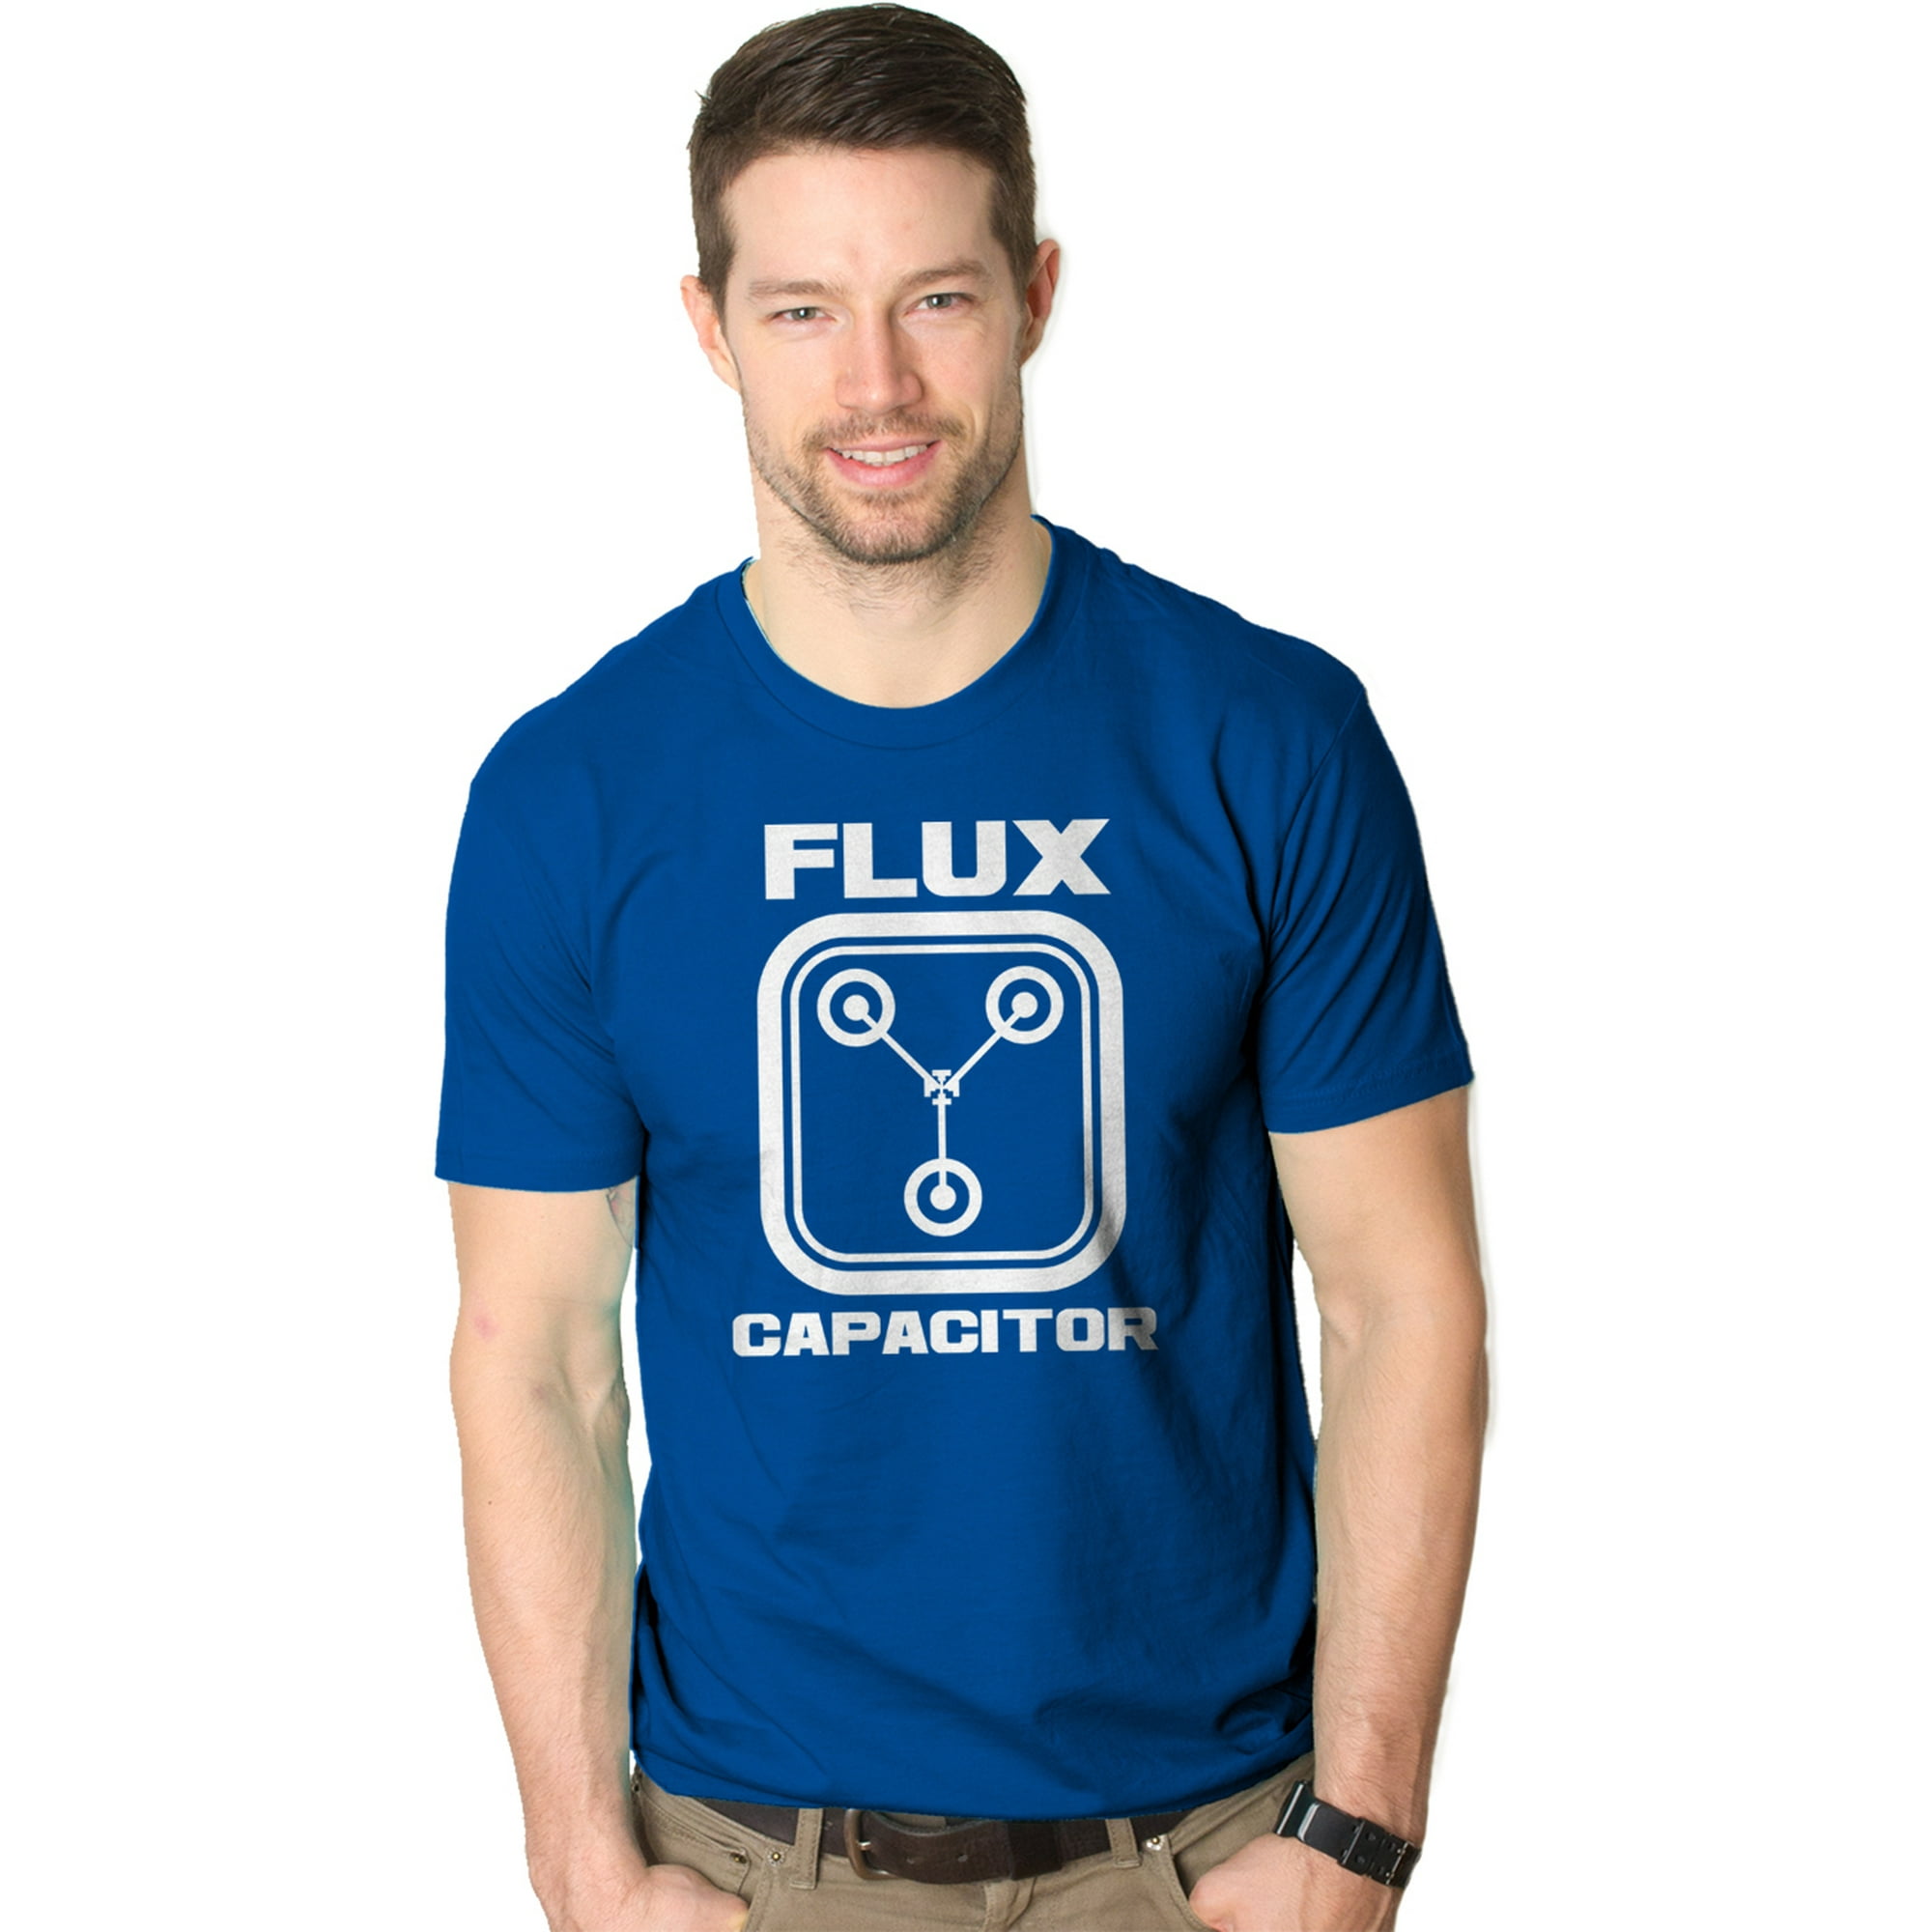 Flux Capacitor Shirt Funny Vintage Retro 80s Movie T shirts for Men (Blue) - XL Graphic Tees -